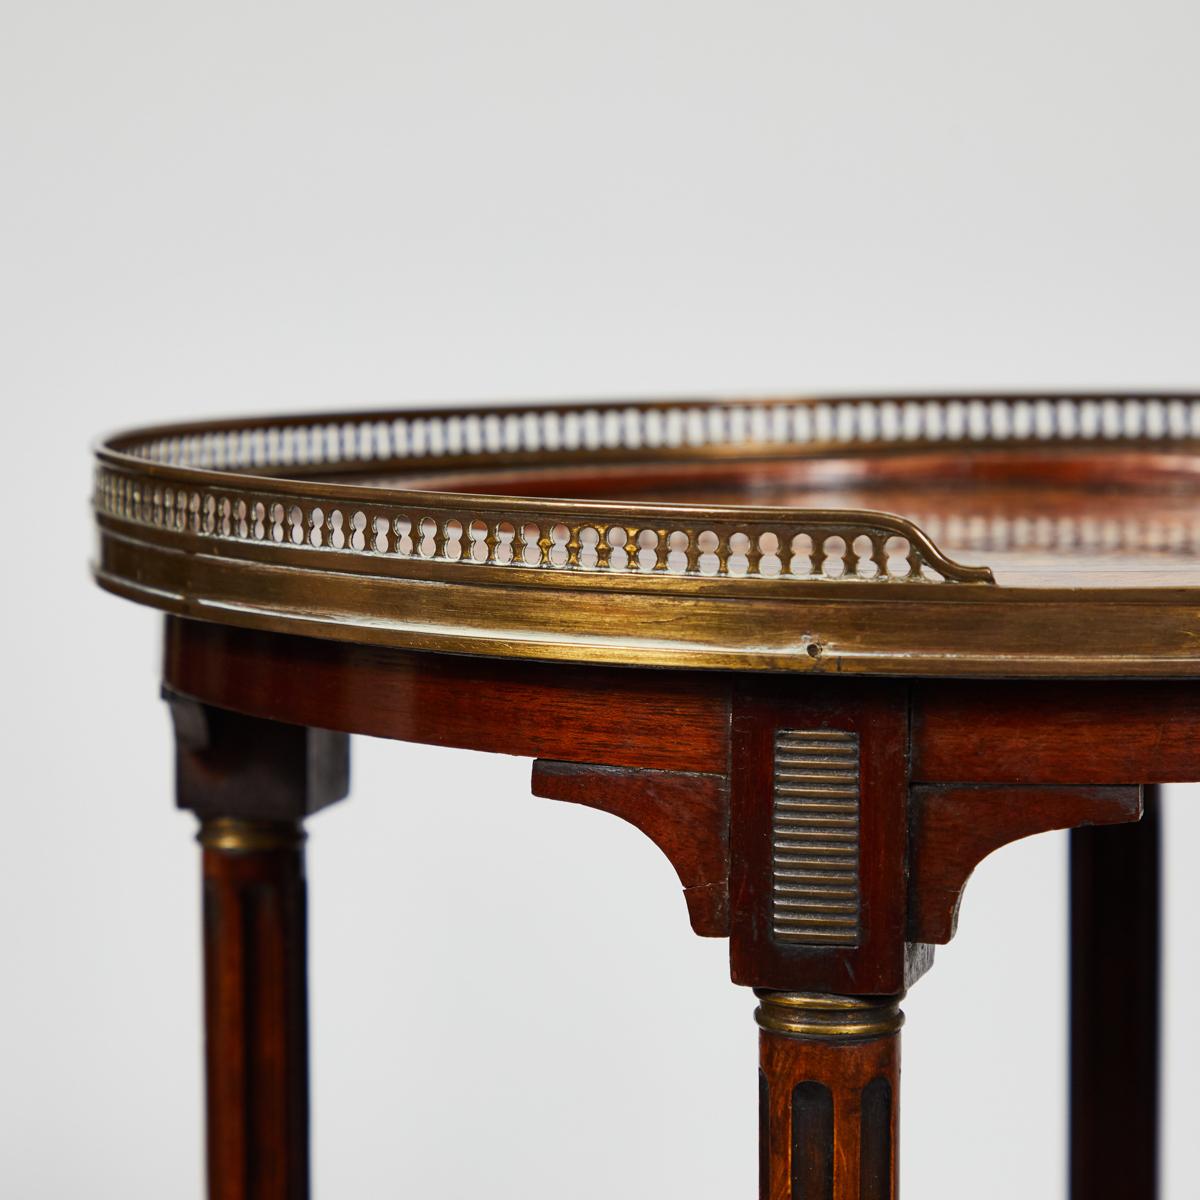 Victorian 19th Century Three-Tier Side Table in Mahogany with Marble Top and Brass Galley